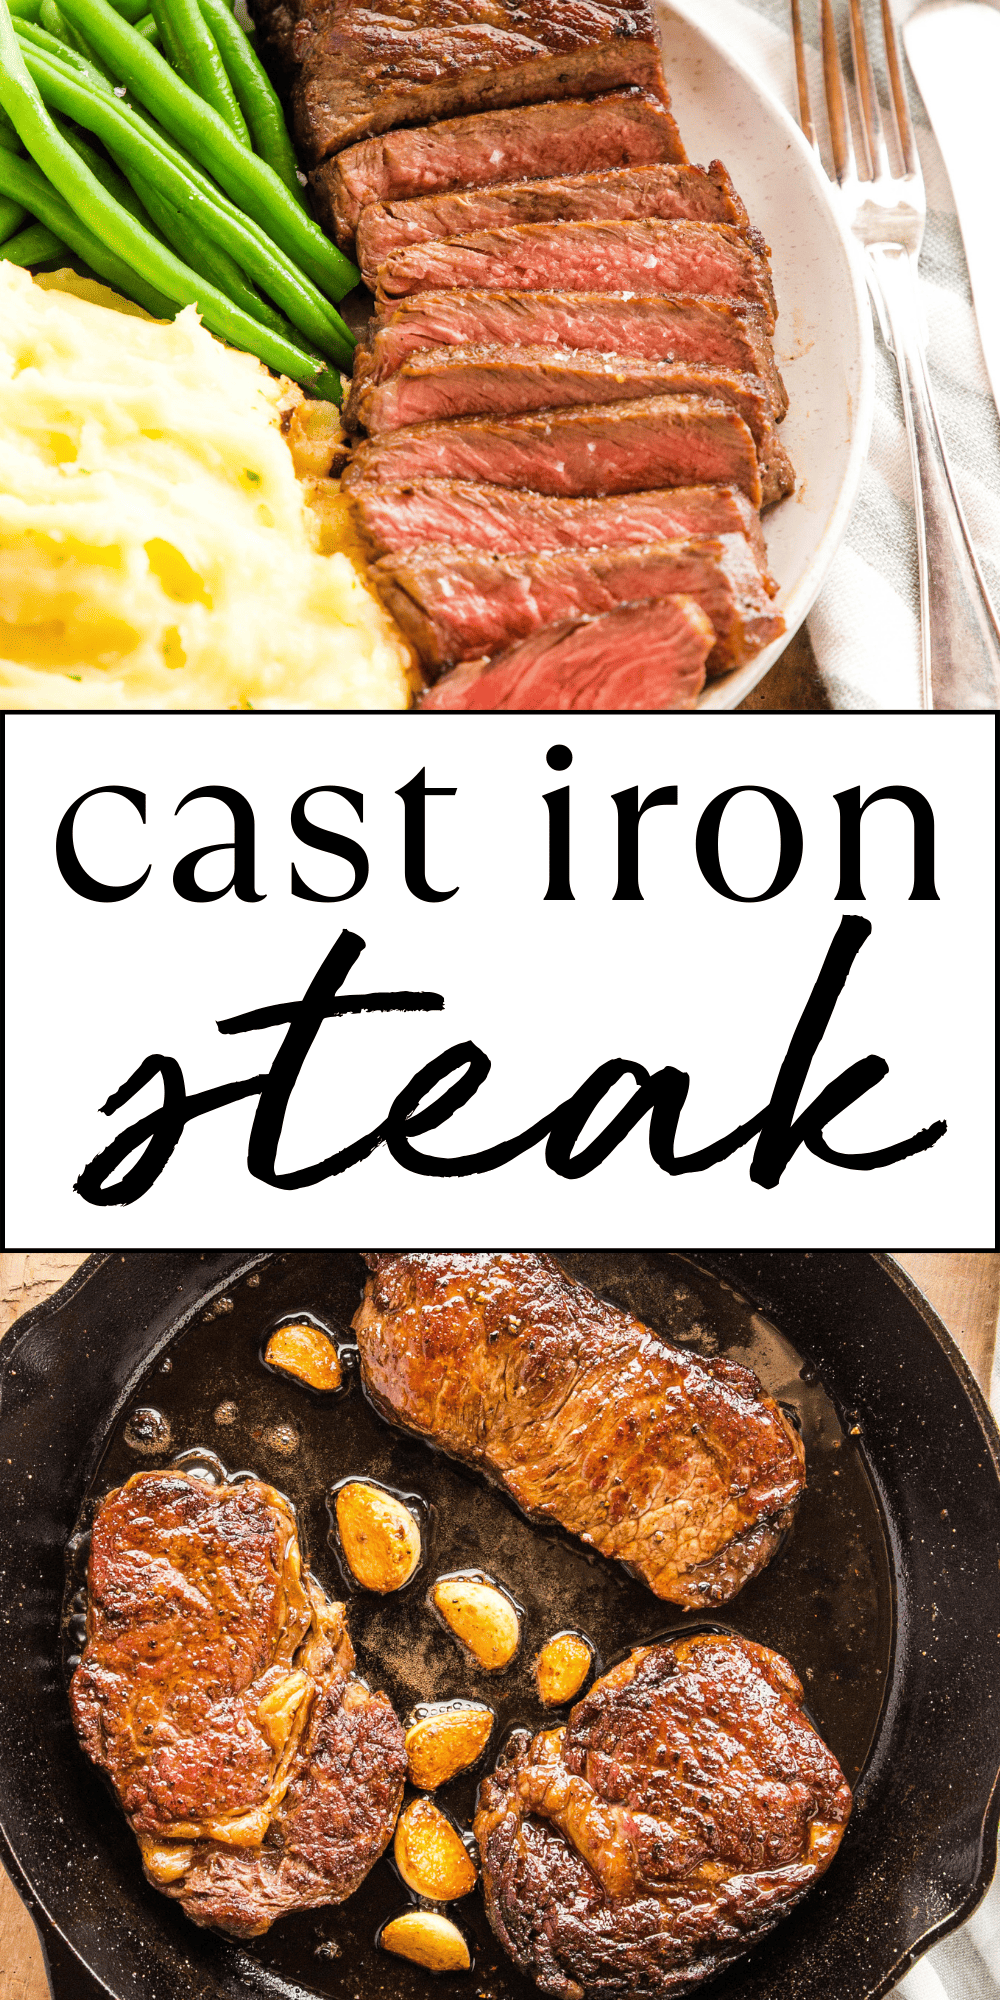 This Cast Iron Steak Recipe is the ultimate guide to the perfect medium rare steak - made easy! The best cast iron skillet steak made with basic ingredients in 25 minutes or less! Recipe from thebusybaker.ca! #steak #easysteak #juicysteak #castironsteak #castironskilletsteak #restaurantsteak via @busybakerblog